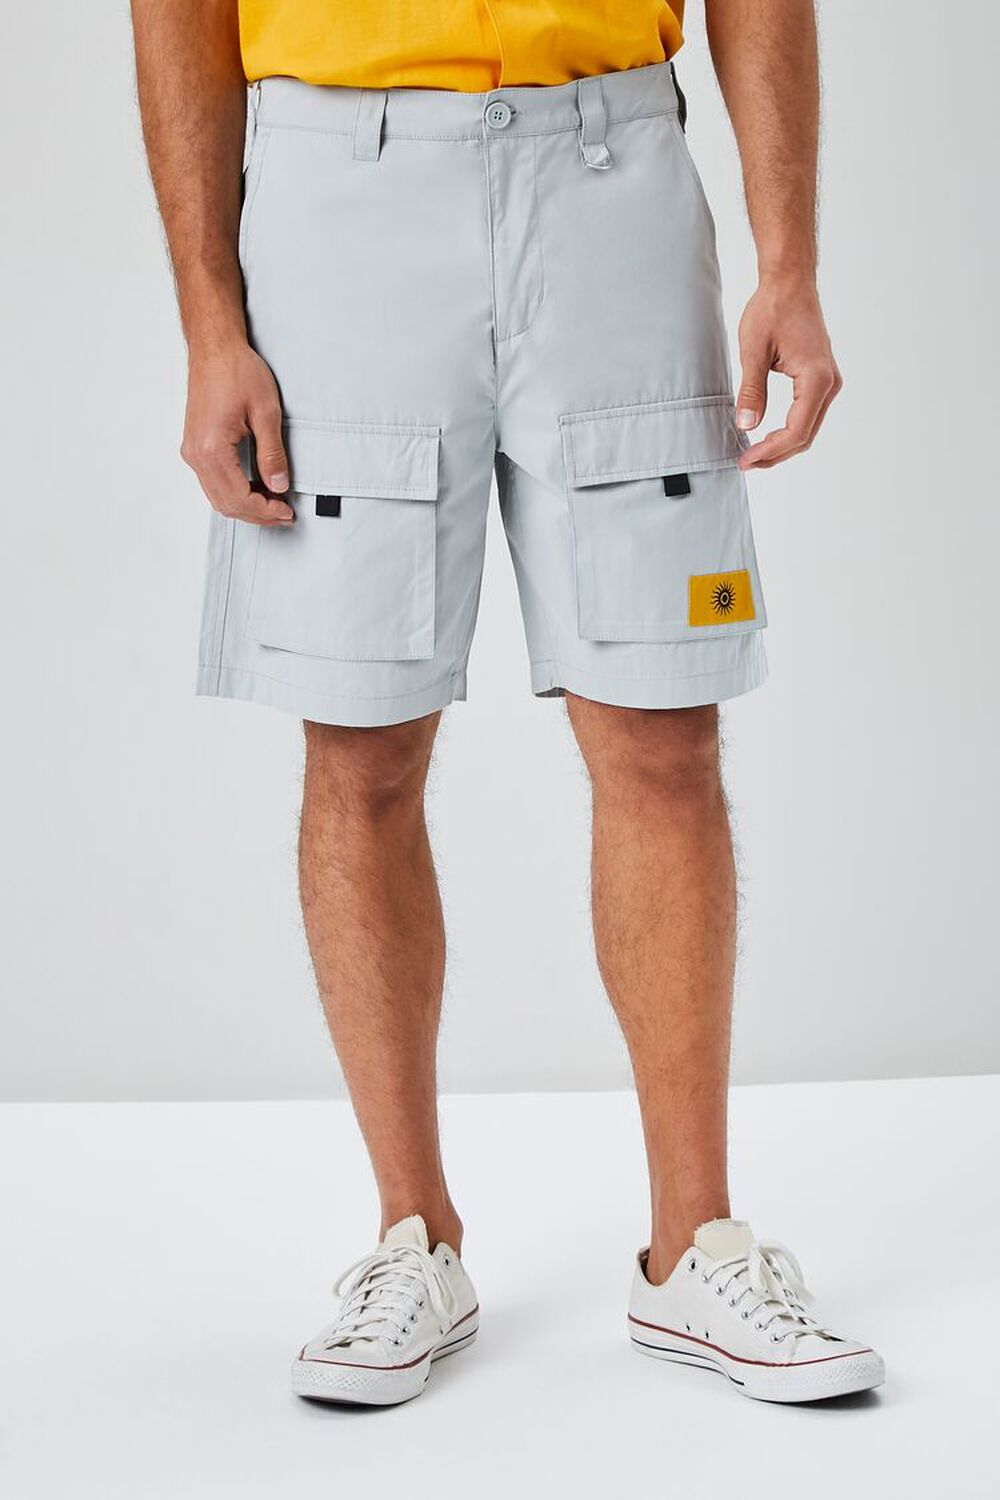 GREY Sun Patch Graphic Cargo Shorts, image 2